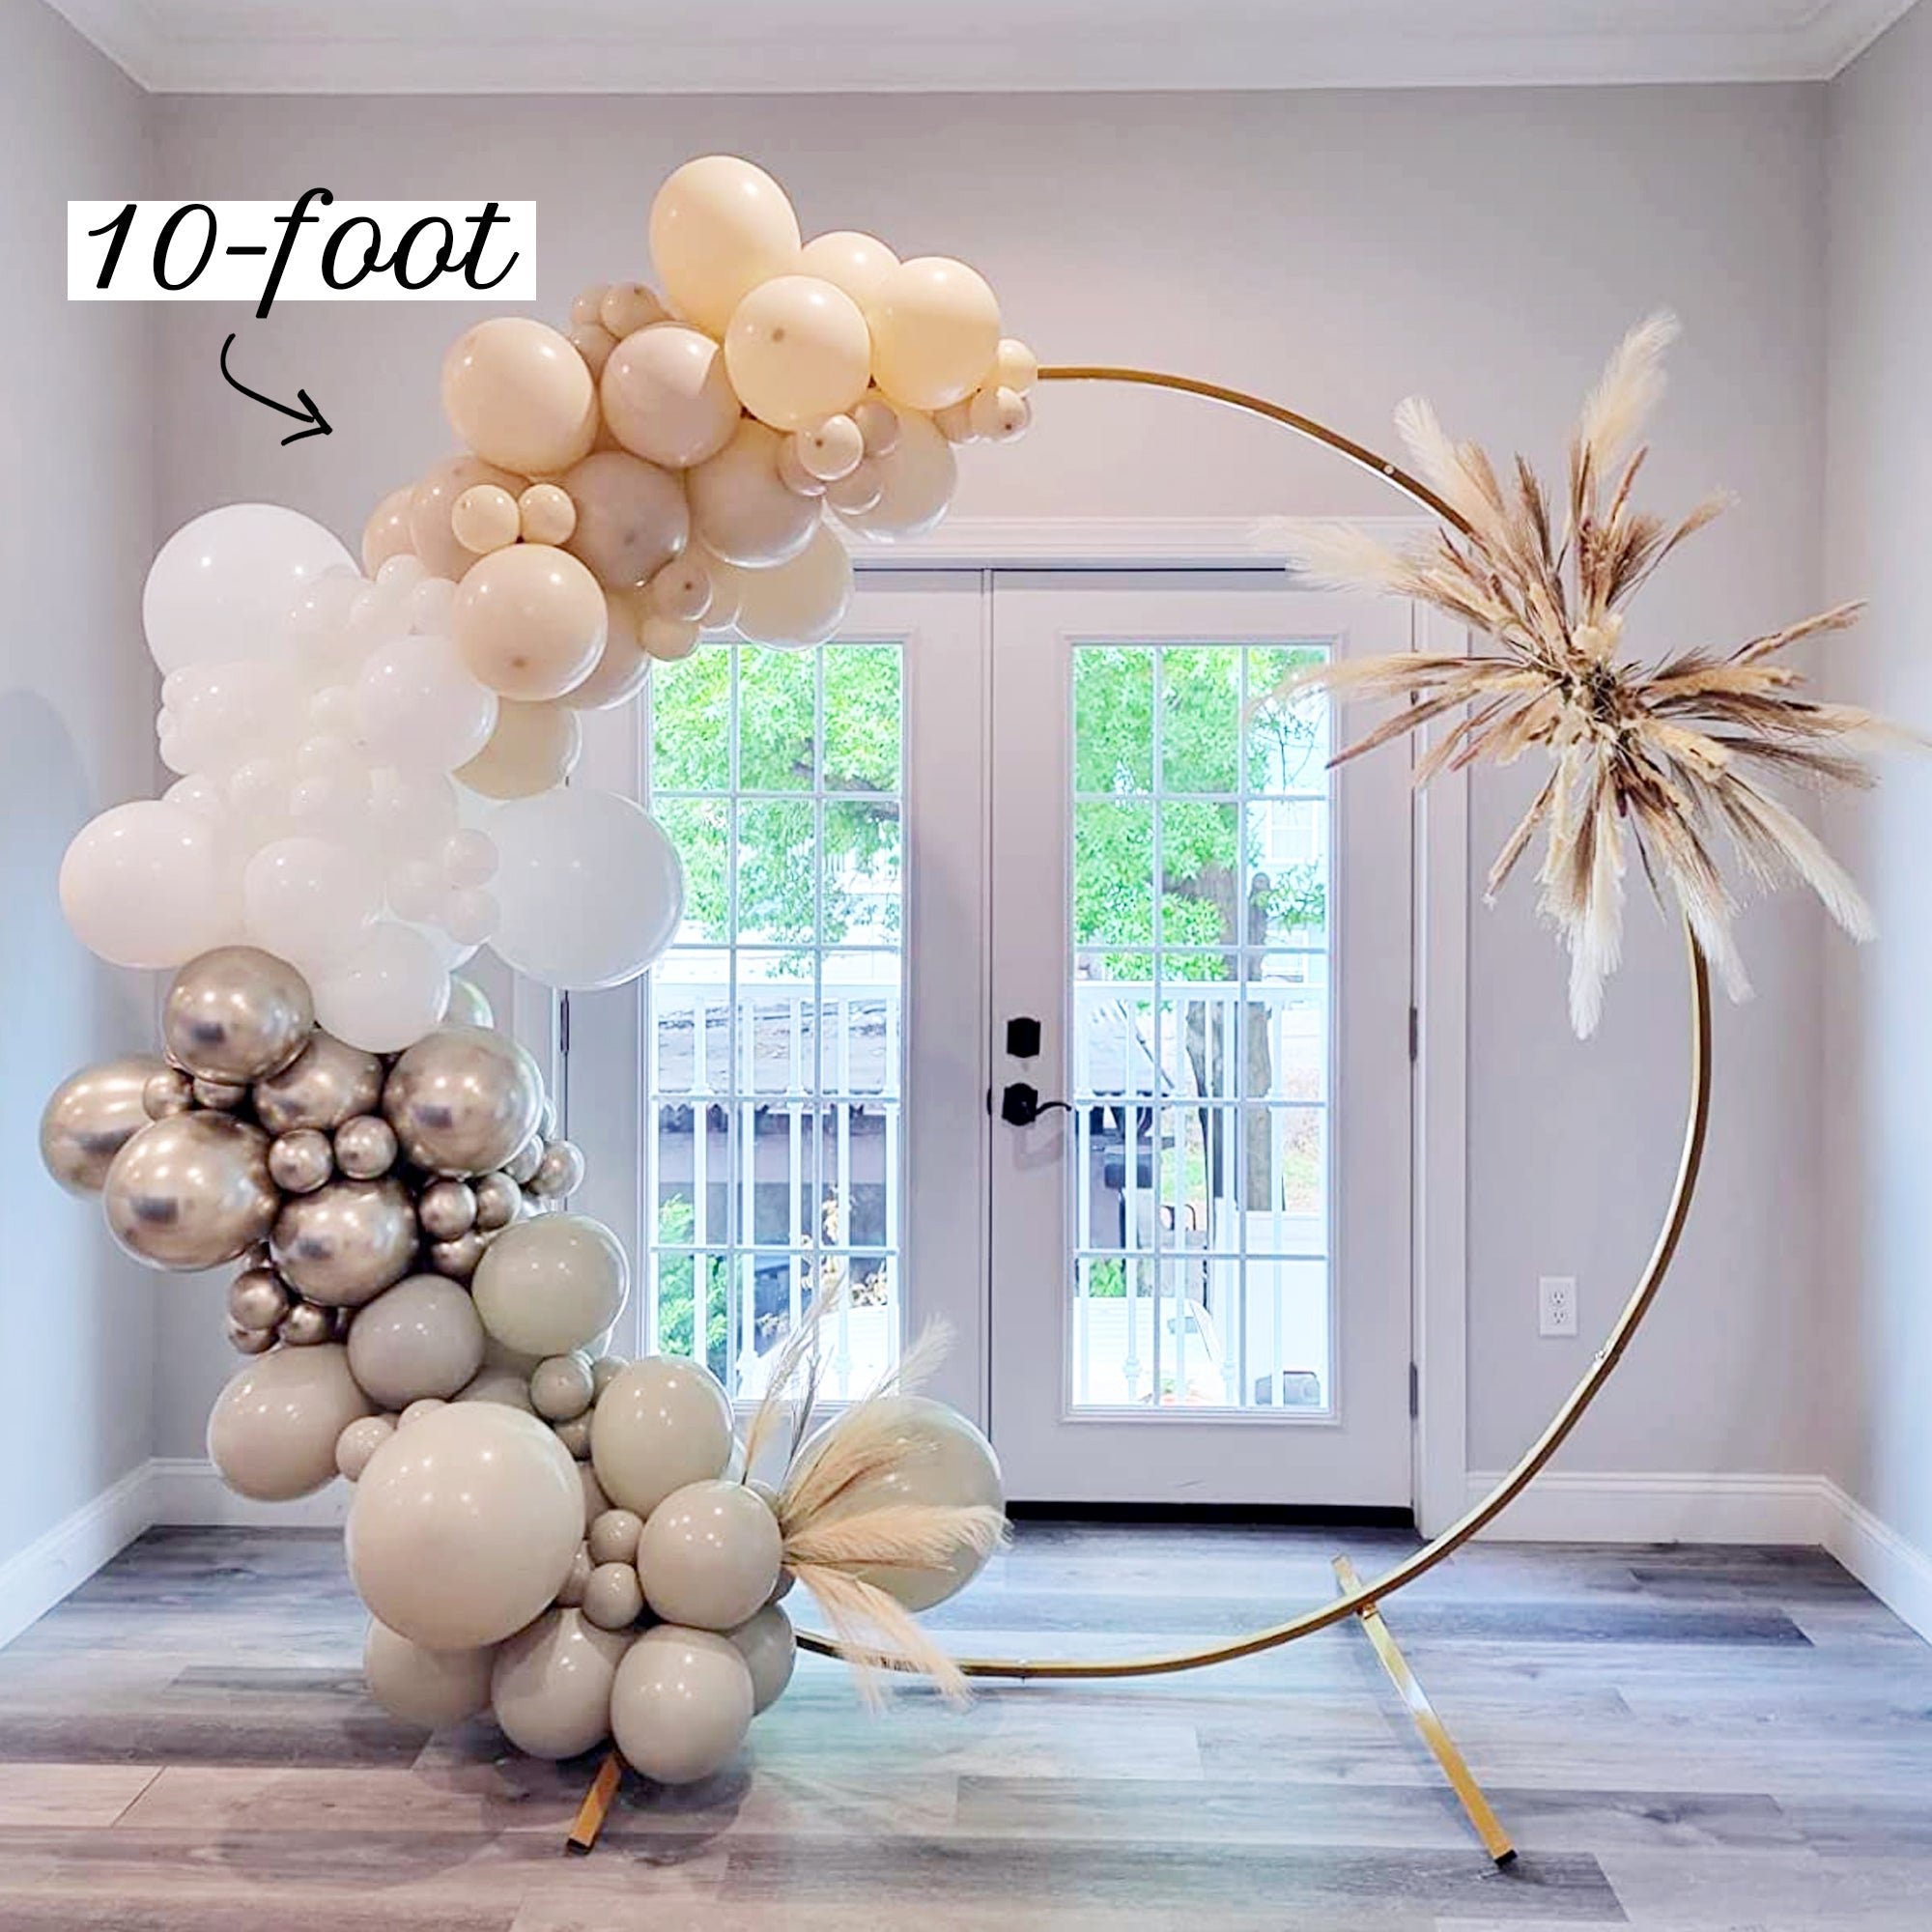 Step-By-Step DIY Balloon Arch Instructions